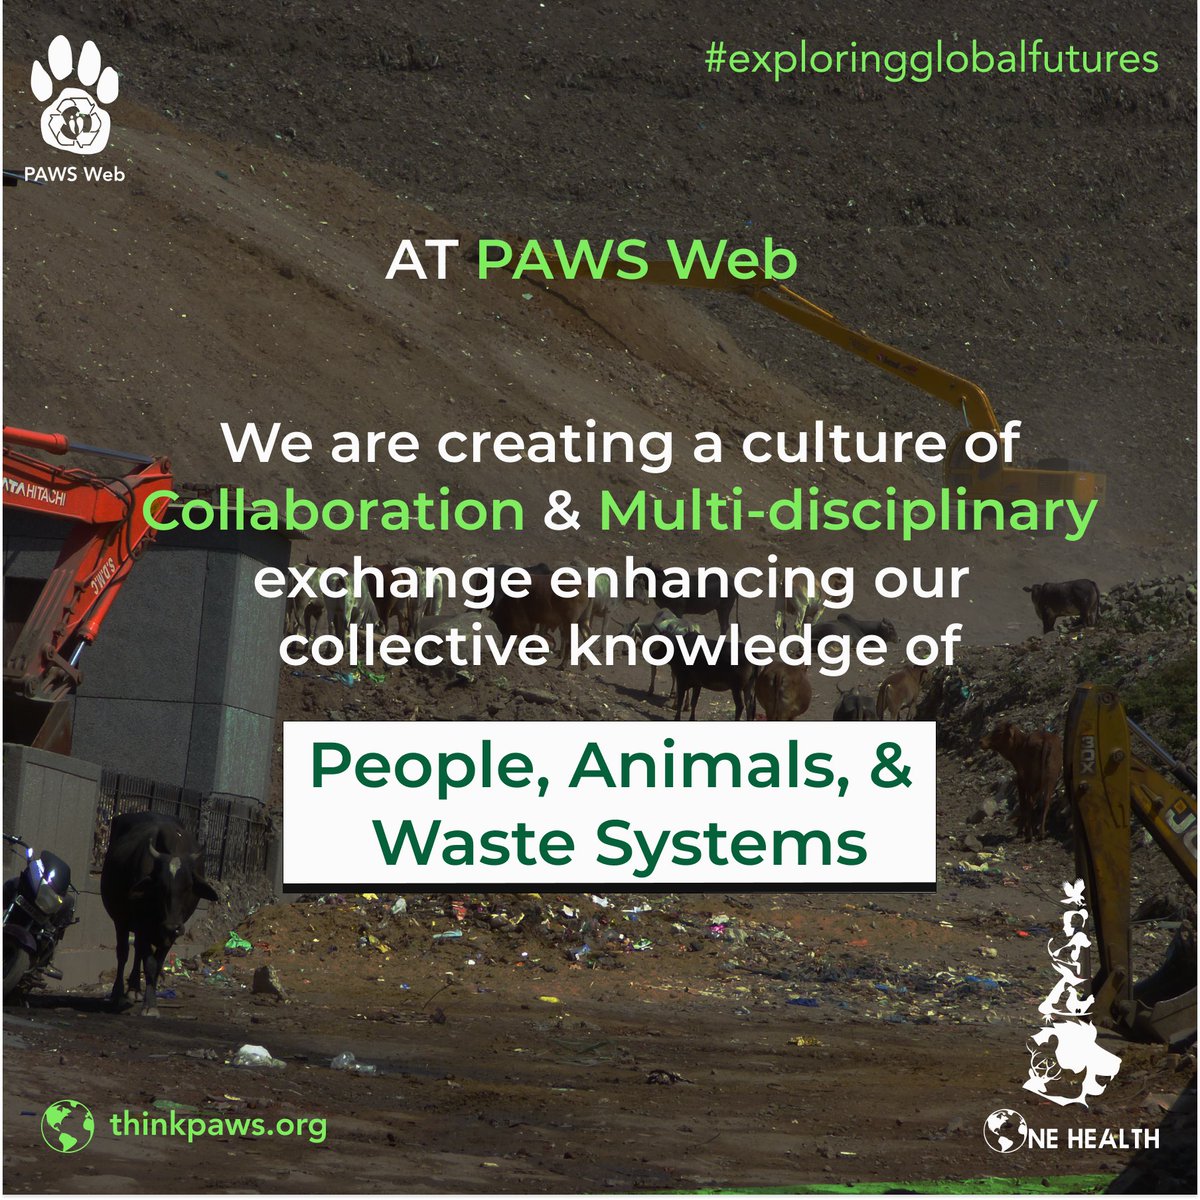 Imagine the possibilities ! When scientists, artists, engineers, and everyday people share knowledge across disciplines, we can solve sustainability challenges faster. What ideas would YOU contribute? #pawsweb #science #research #sustainability #people #animals #waste #systems